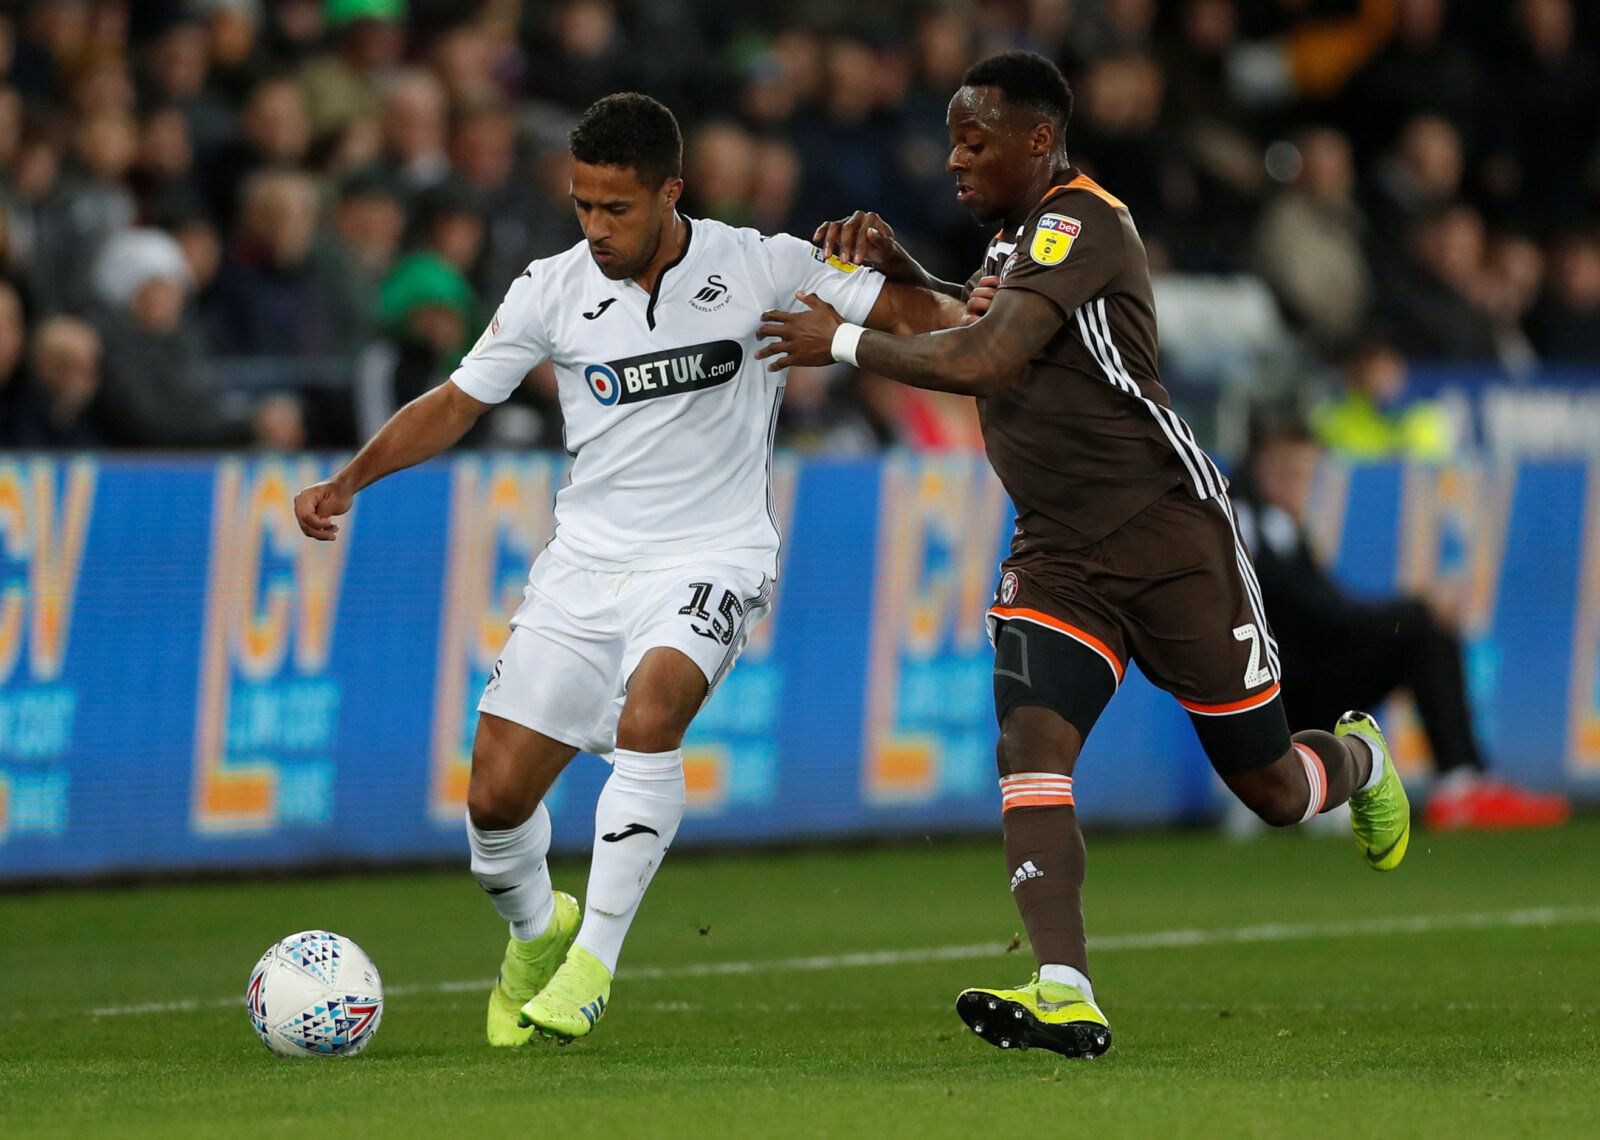 Soccer Football - Championship - Swansea City v Brentford - Liberty Stadium, Swansea, Britain - April 2, 2019   Wayne Routledge of Swansea City in action with Moses Odubajo of Brentford     Action Images/Matthew Childs    EDITORIAL USE ONLY. No use with unauthorized audio, video, data, fixture lists, club/league logos or 